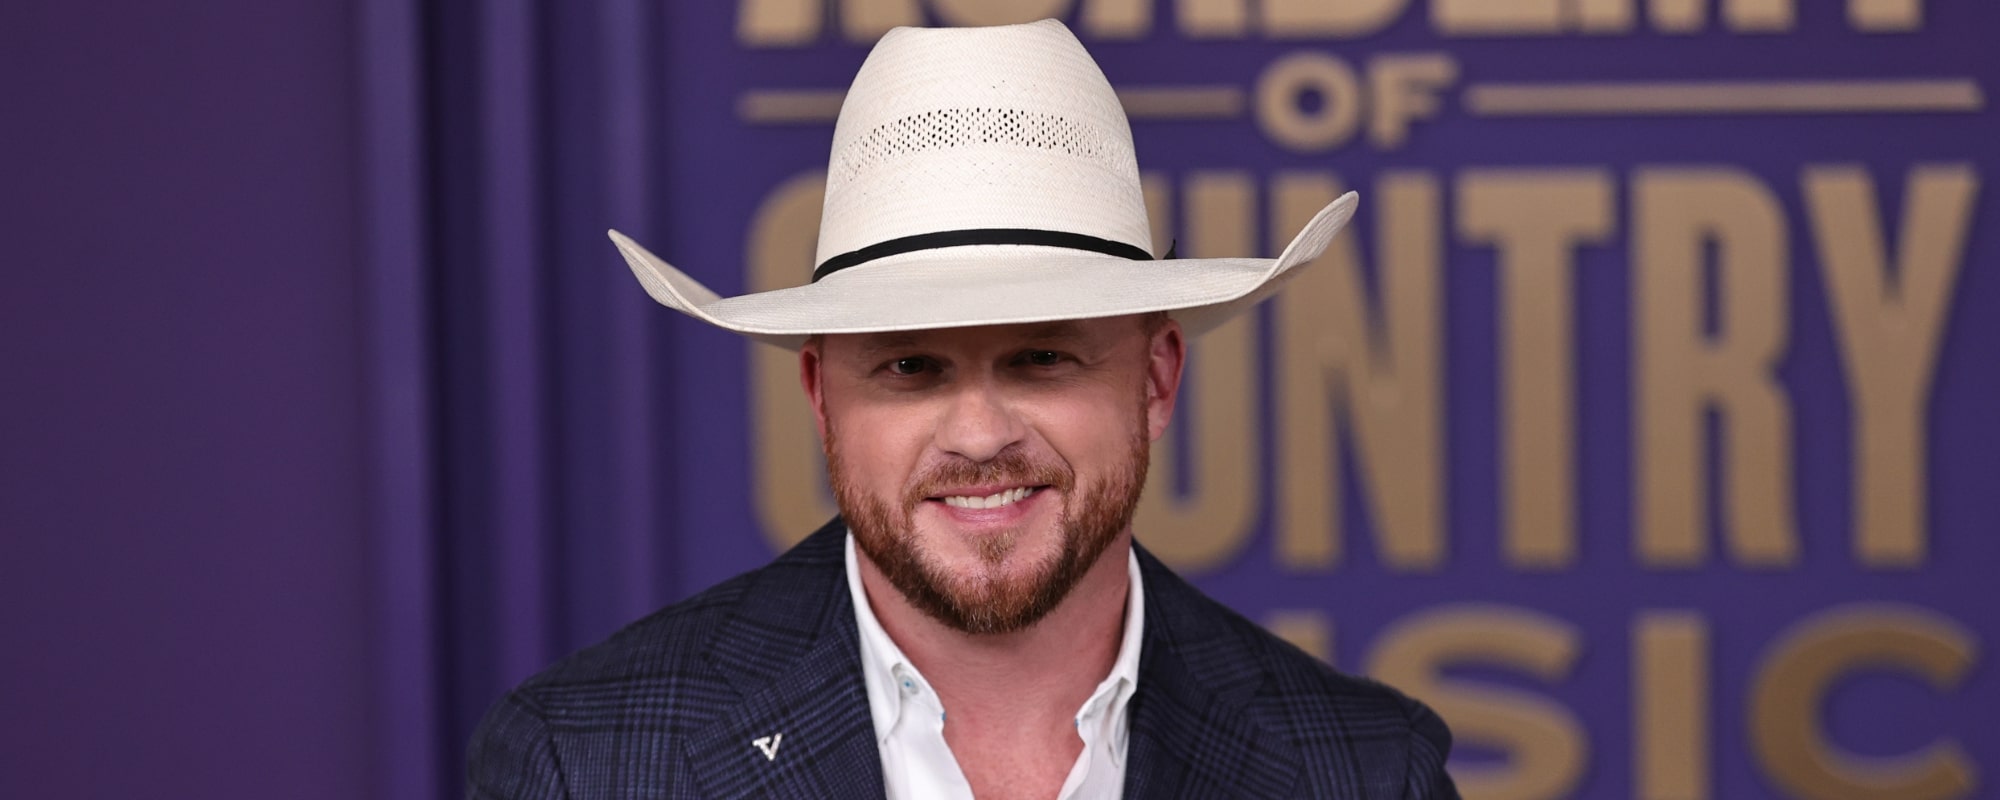 Cody Johnson Recalls a Time When His Song “Human” Saved a Life: “I Stood There With Her and I Cried”